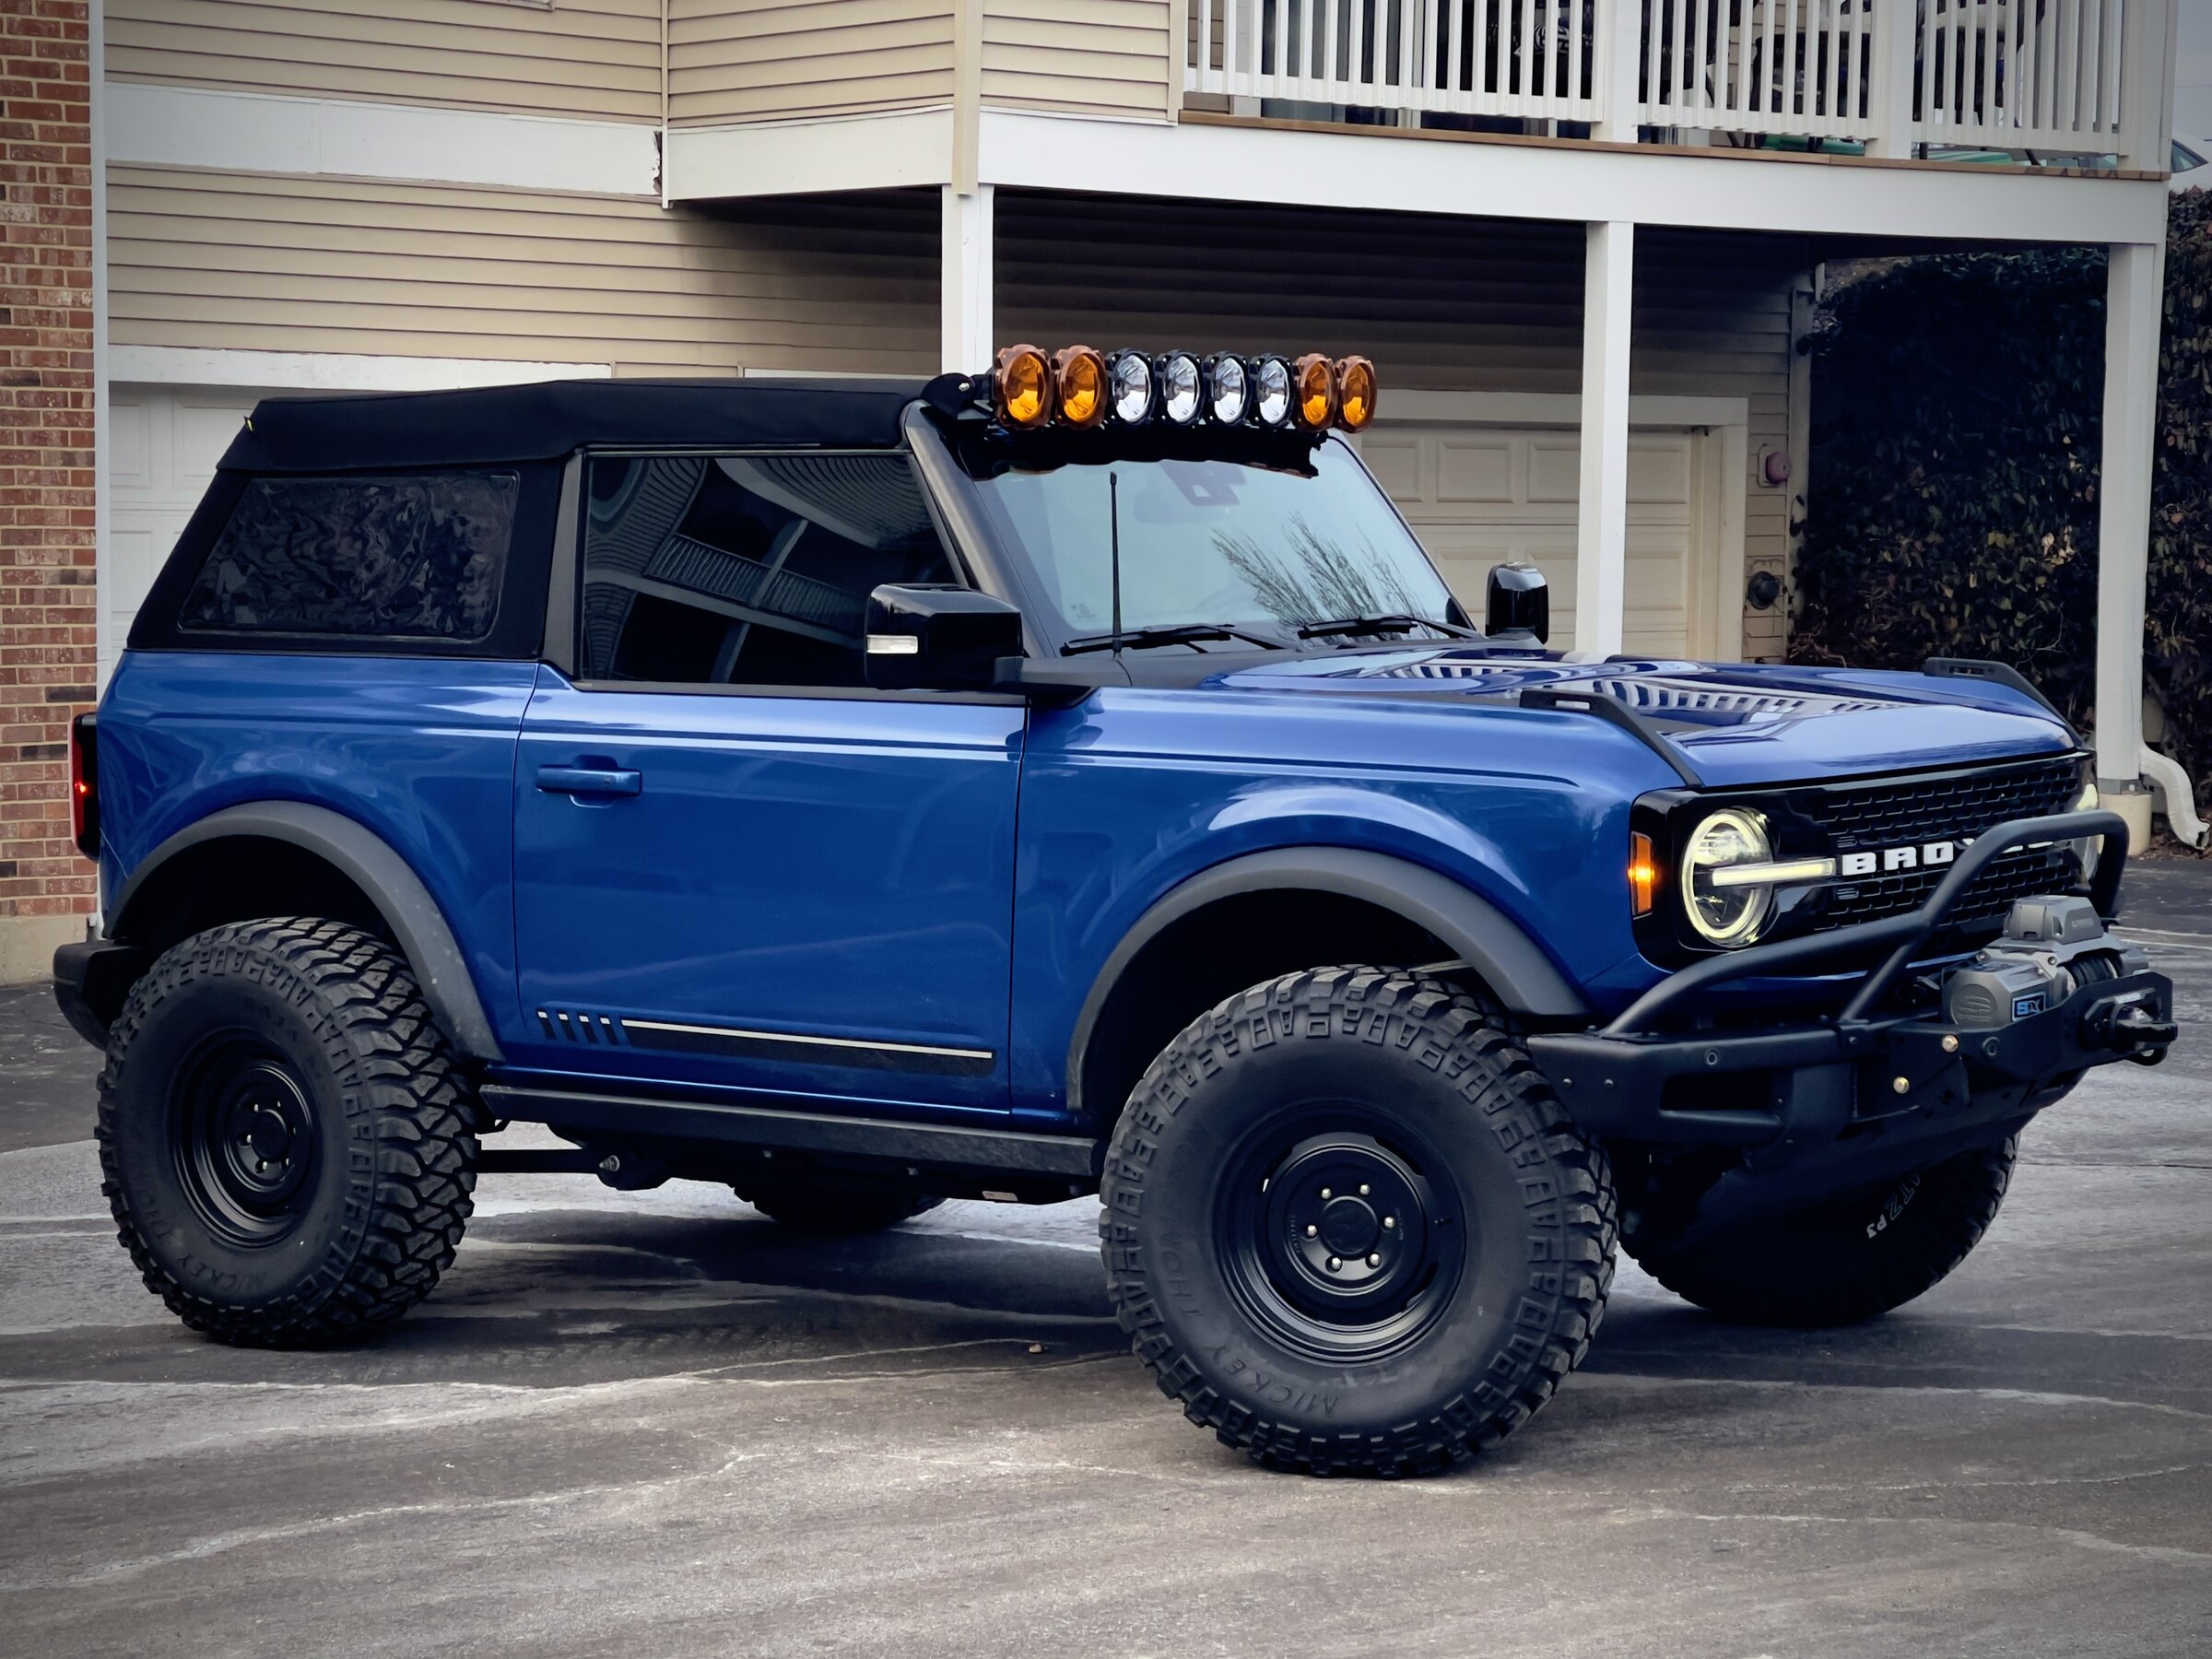 Ford Bronco Lbracket 2 door FE build (UPDATED) on Zone 3" lift and 37's BCC6ACEA-DD25-4E27-9C67-1E7237B5536A